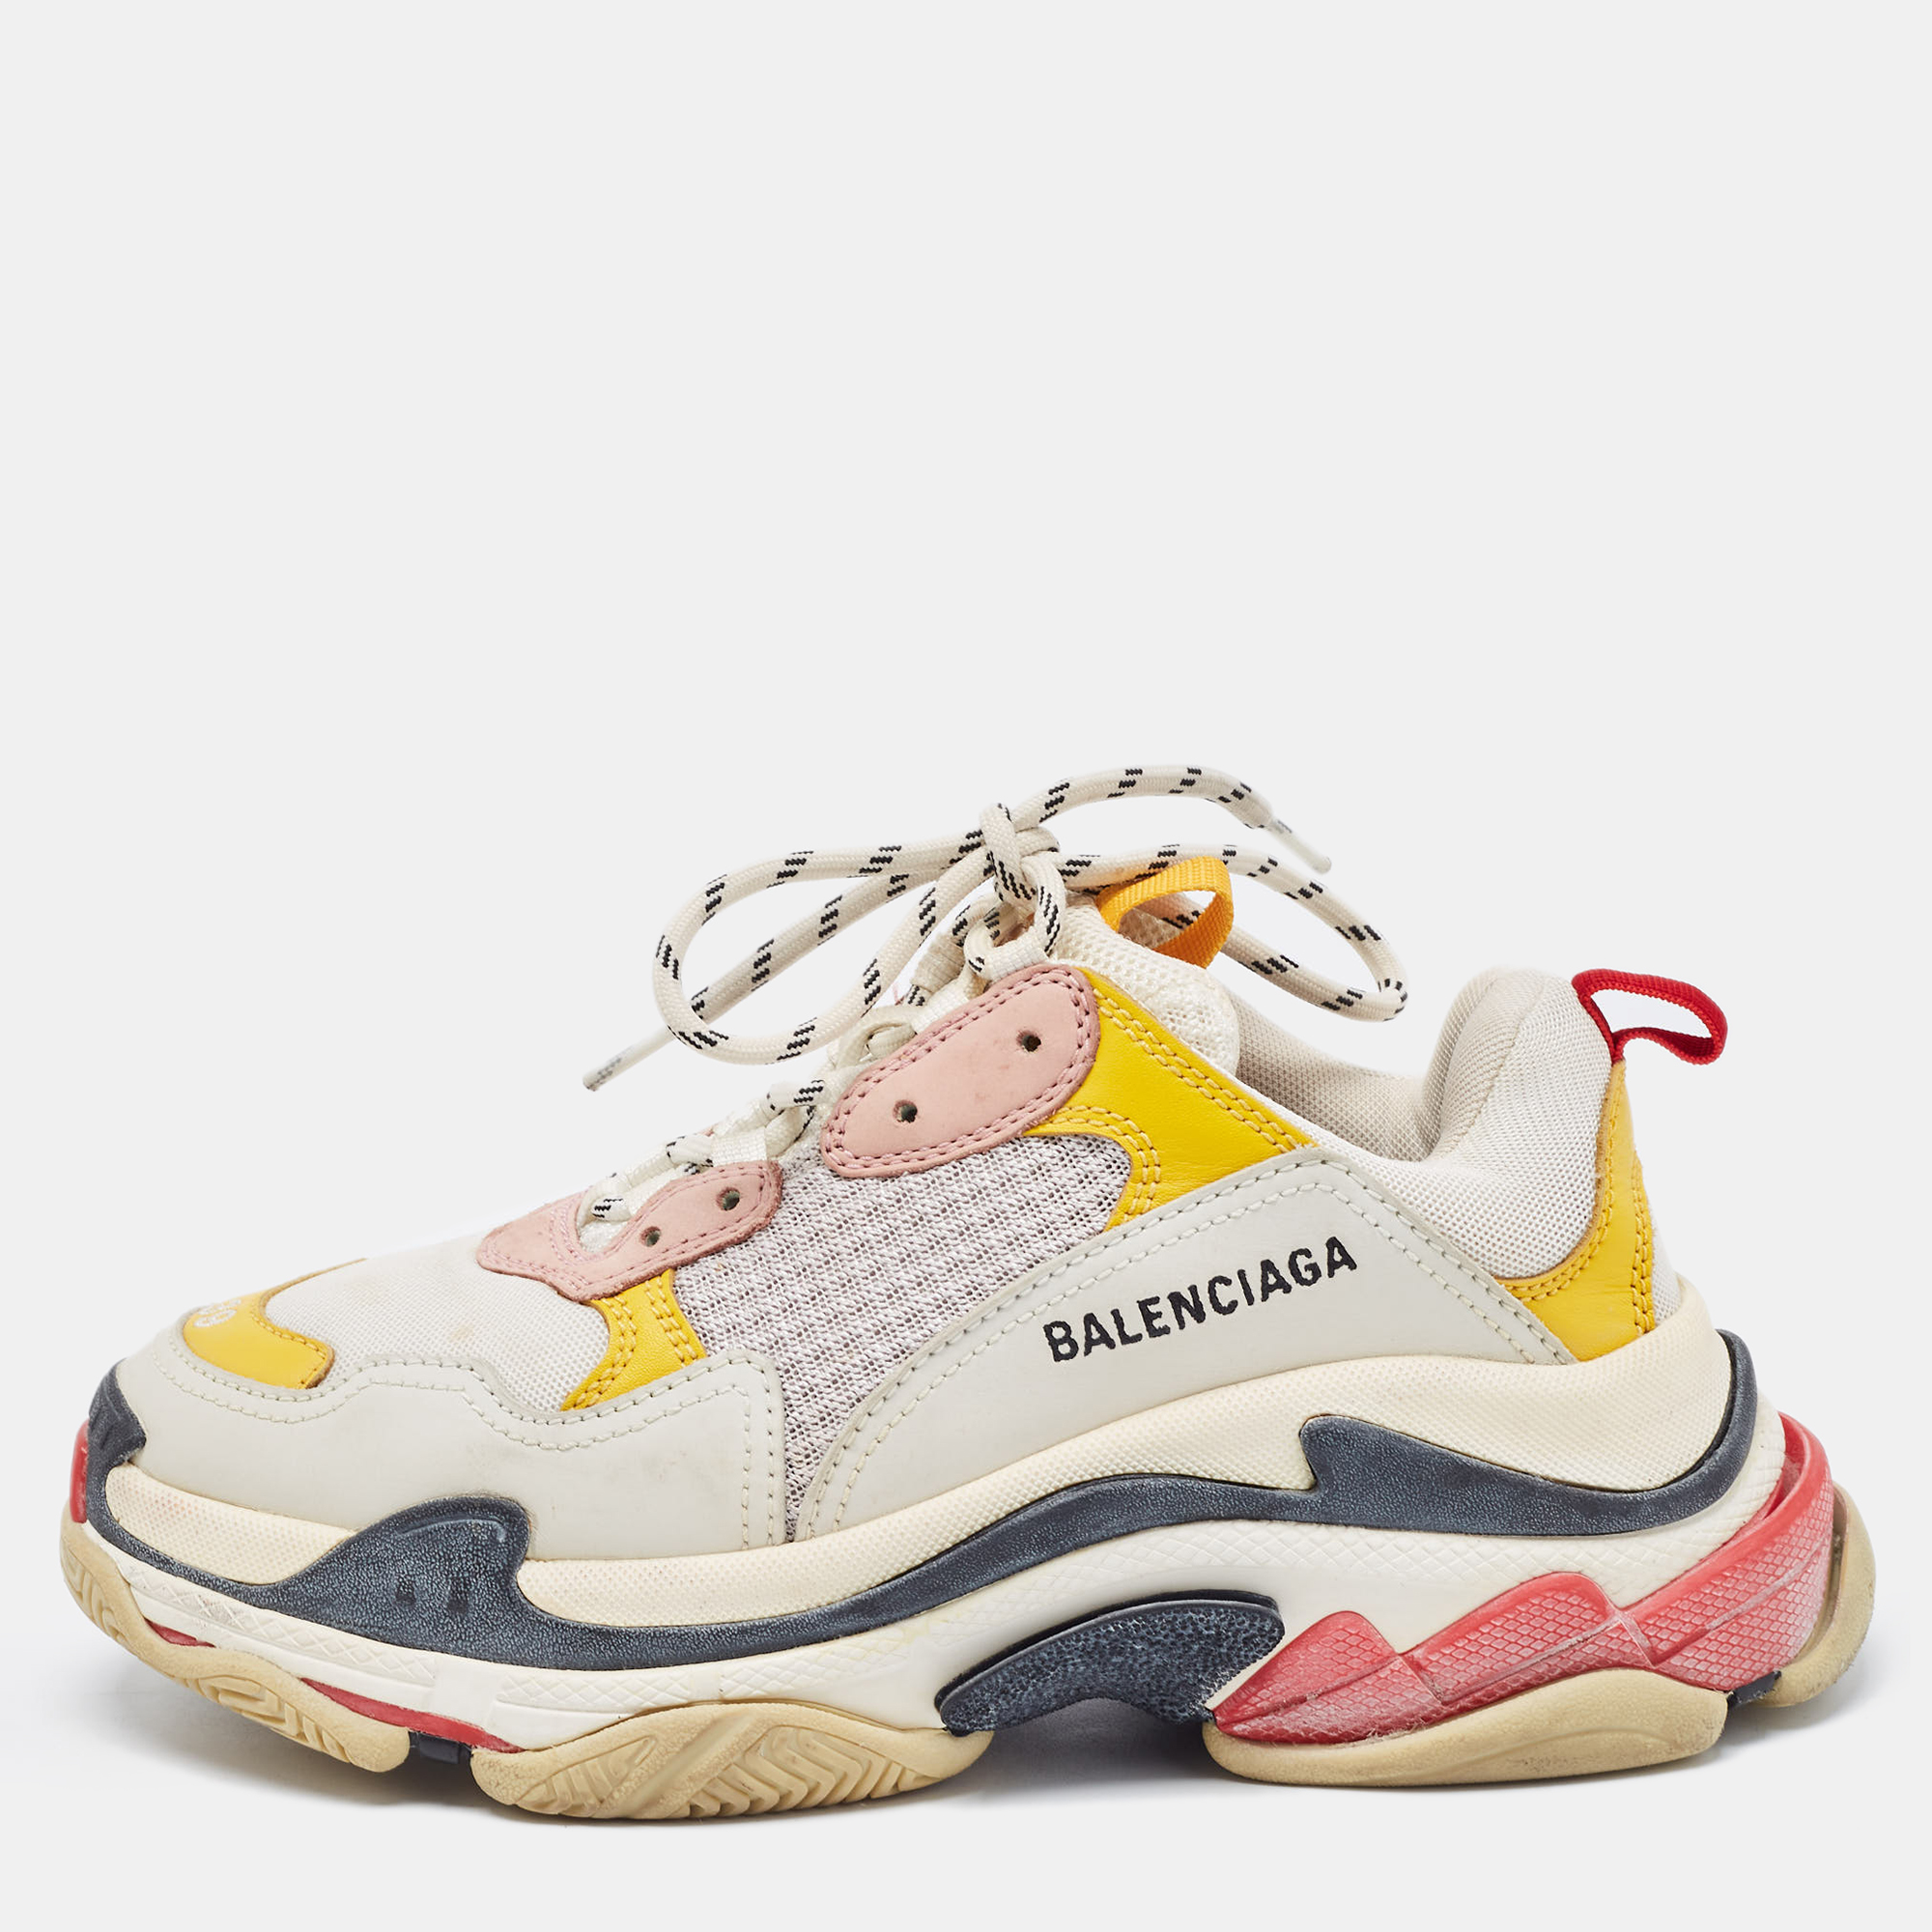 

Balenciaga Multicolor Mesh and Leather Triple S Sneakers Size